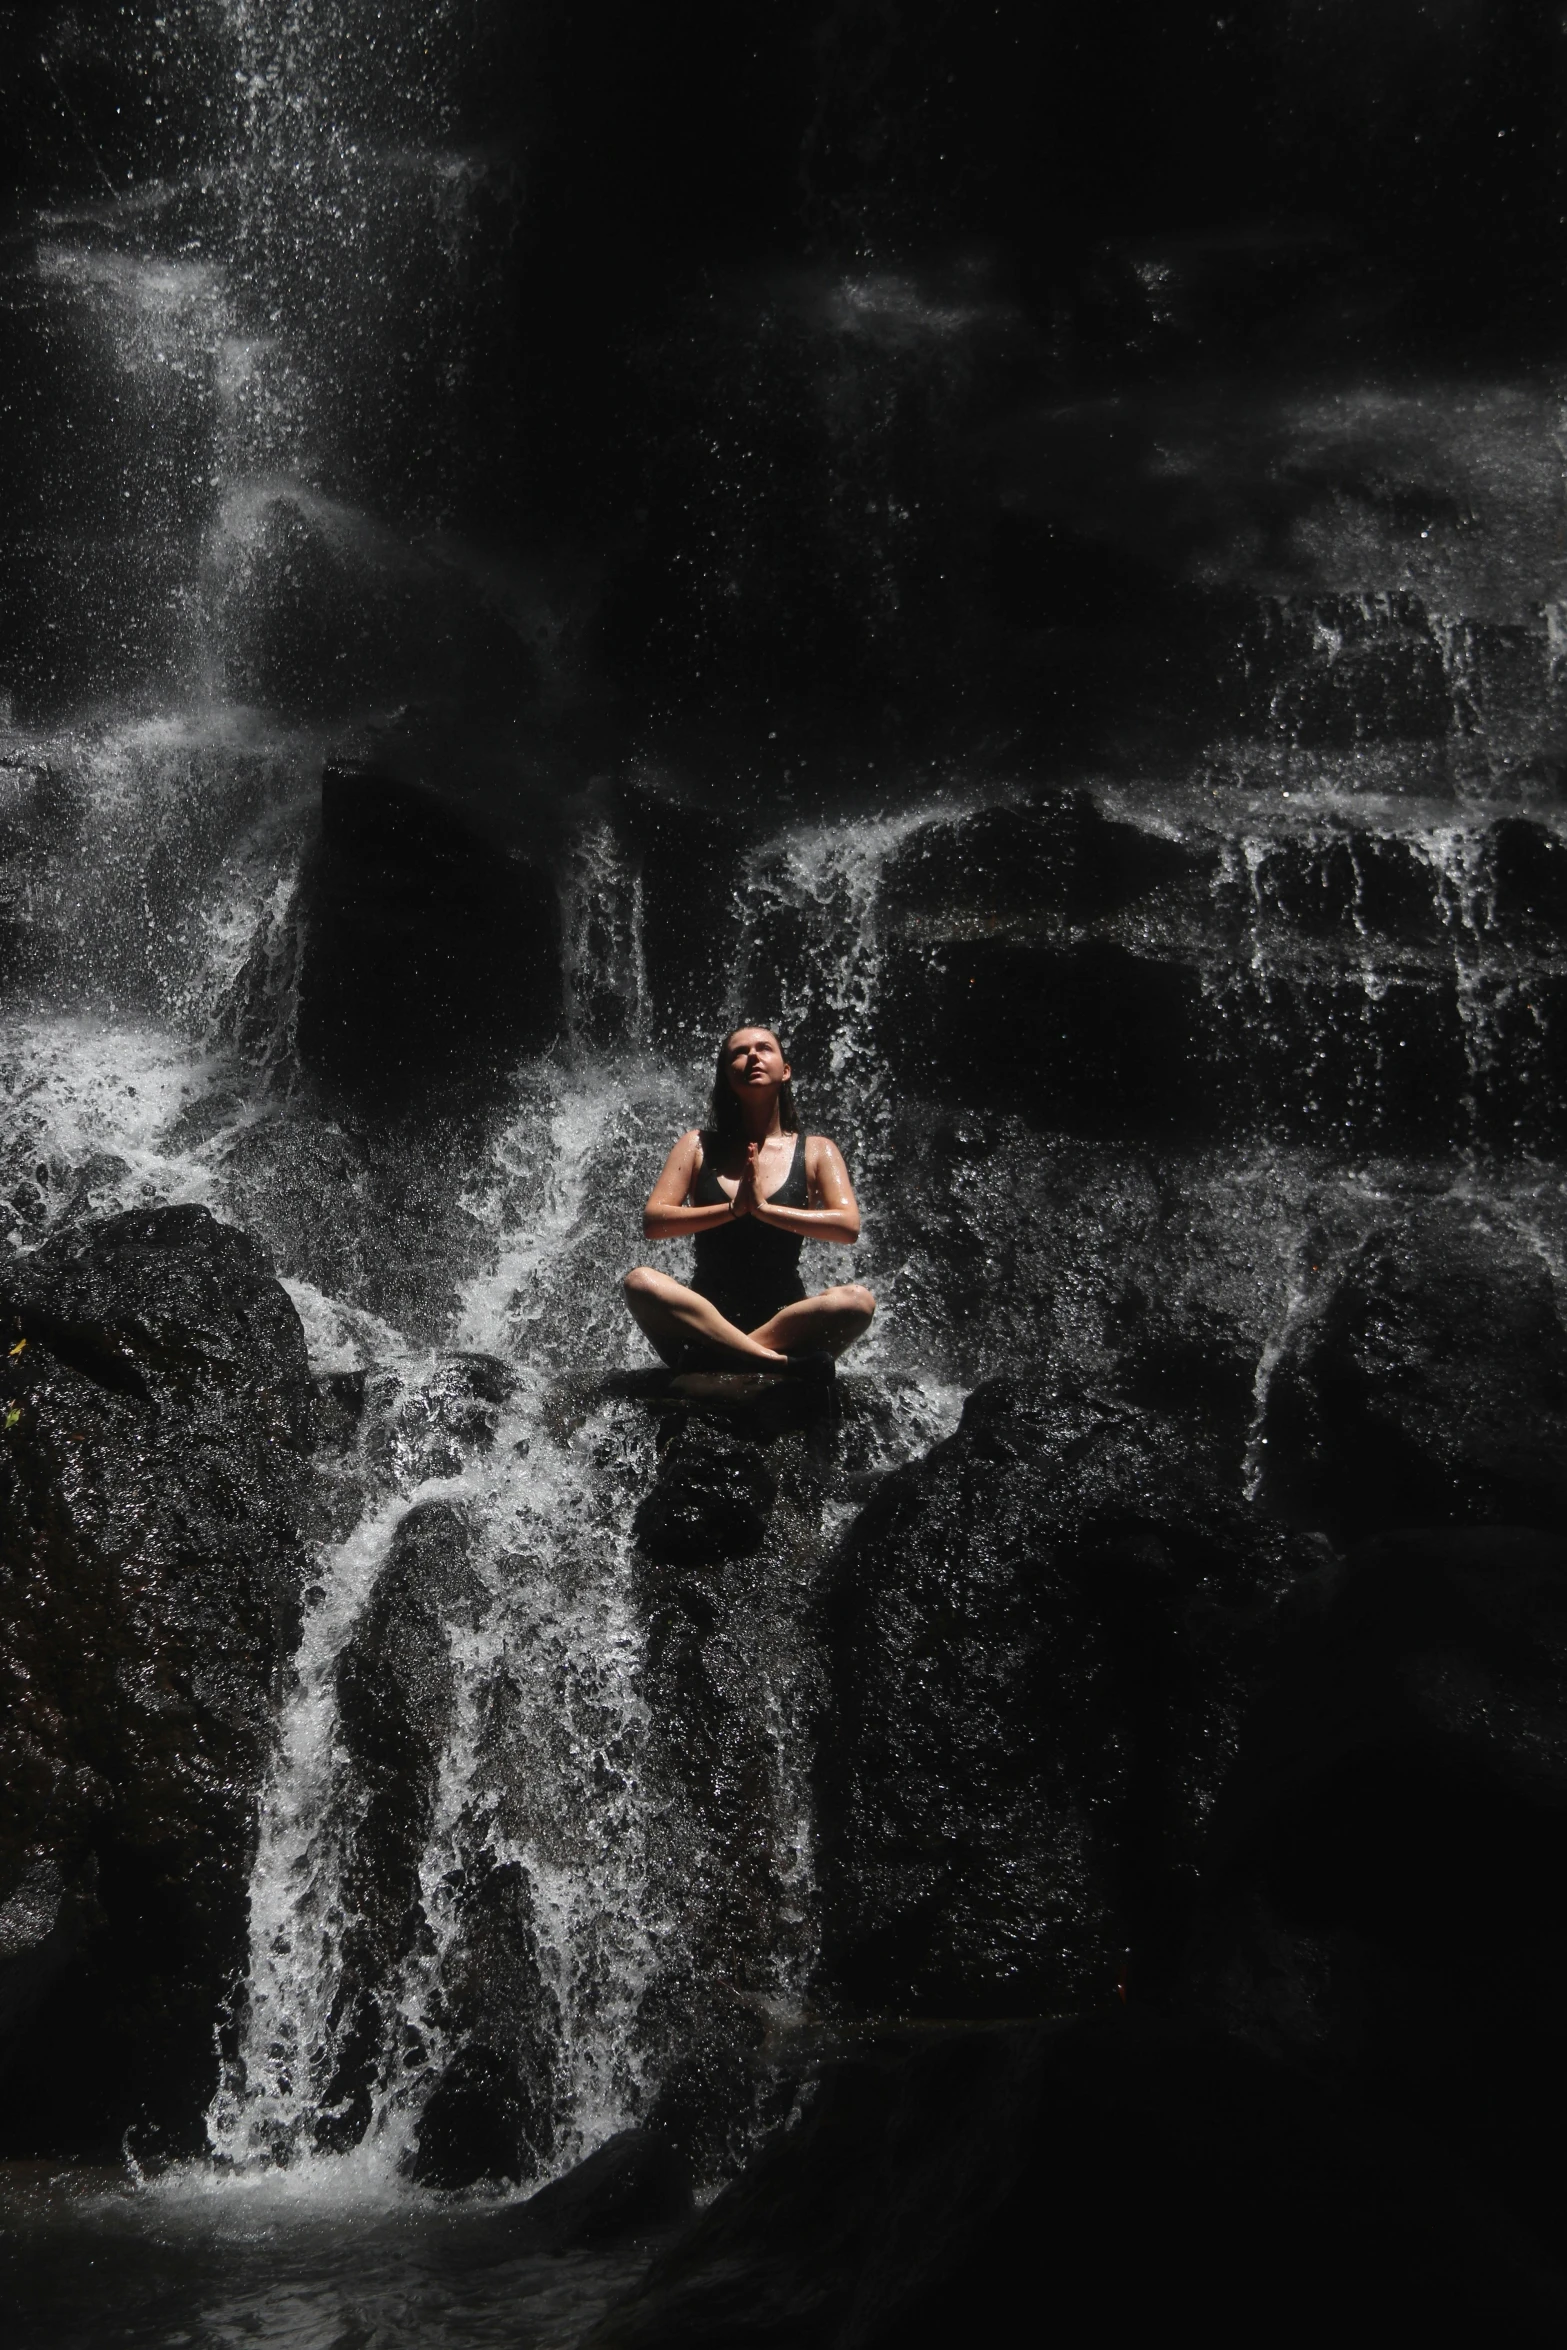 a man floating in water surrounded by rocks and falling rapids